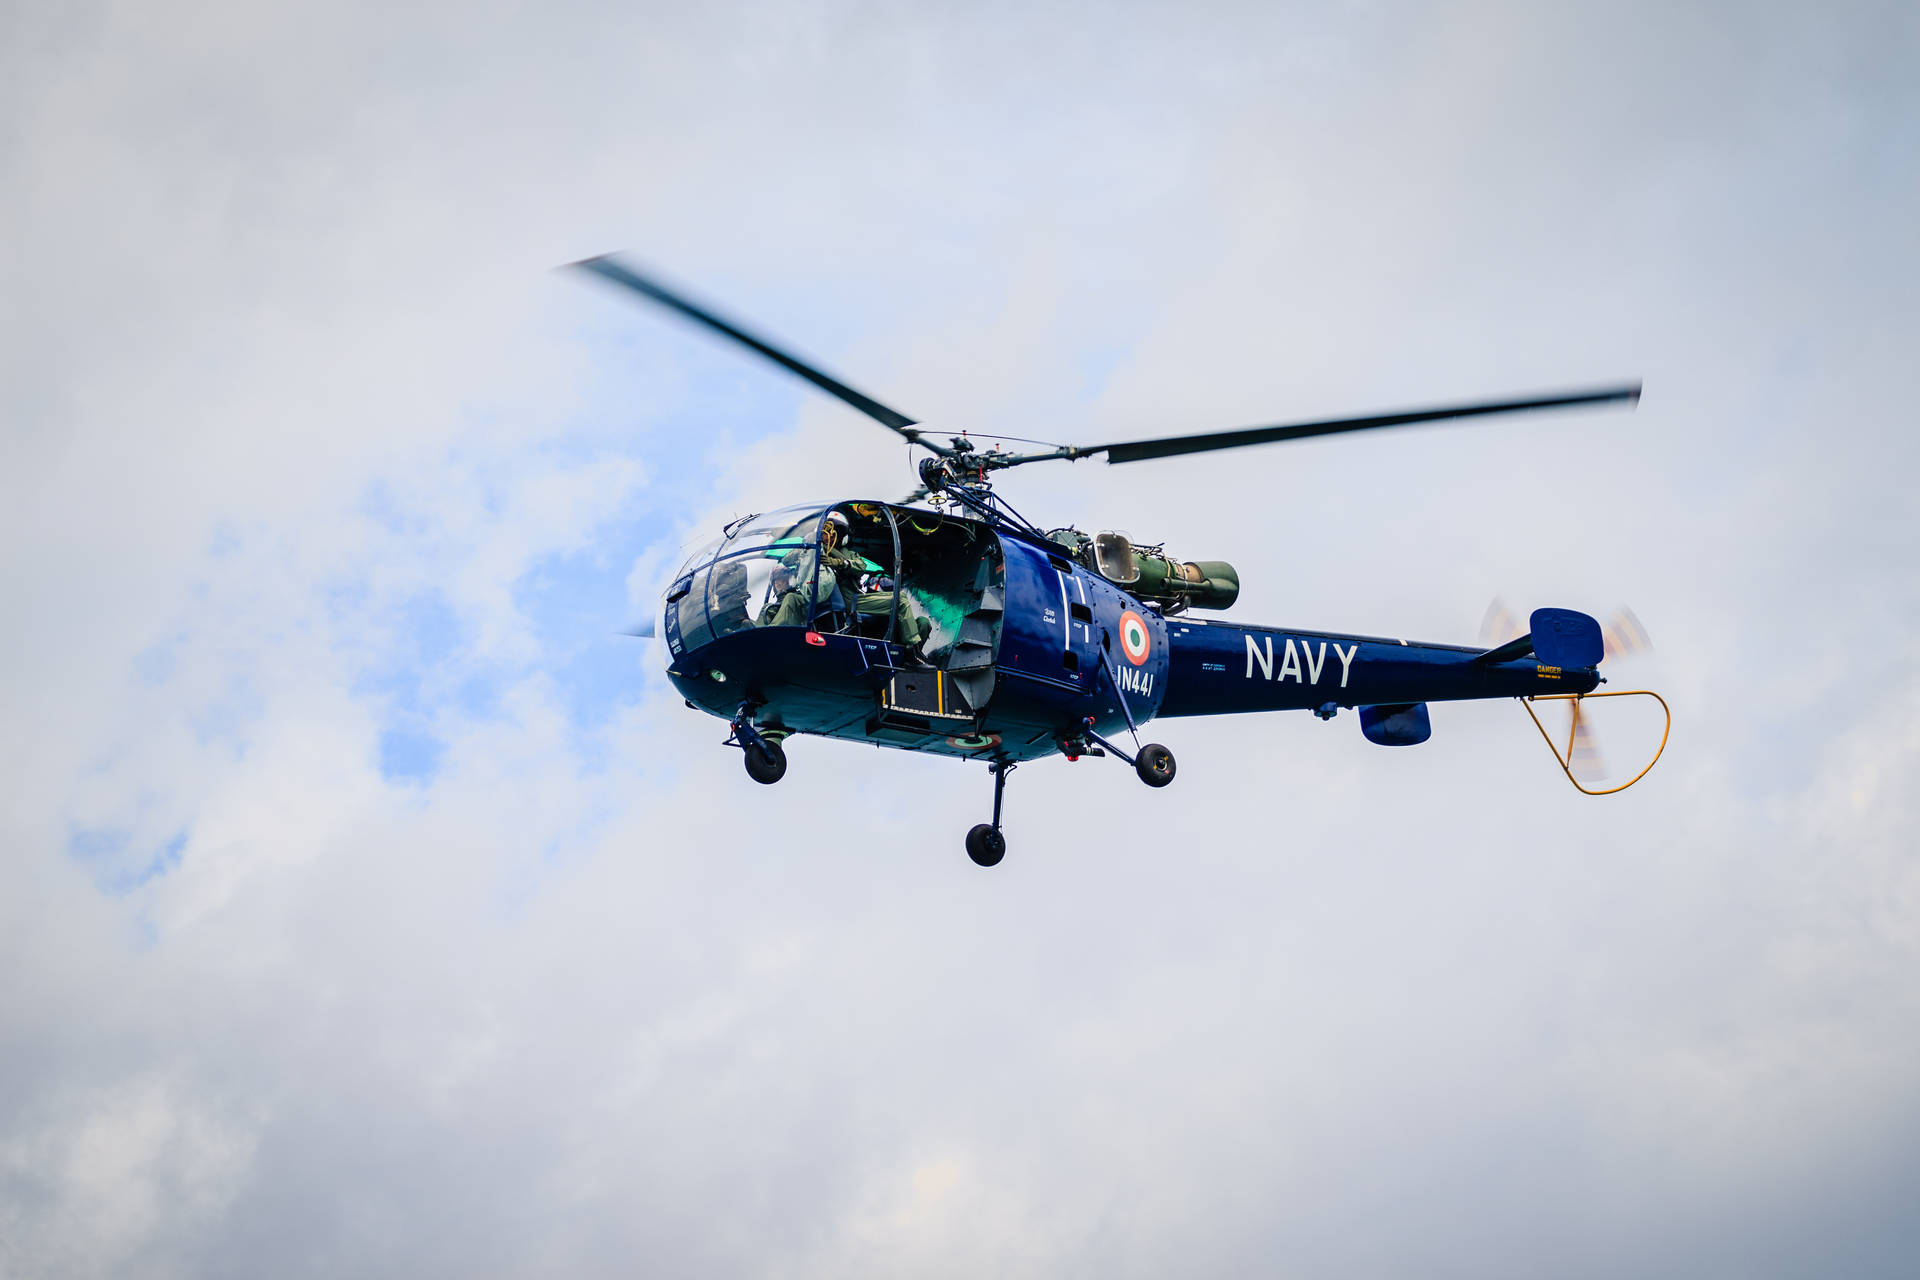 Indian Navy Helicopter 4k Wallpaper